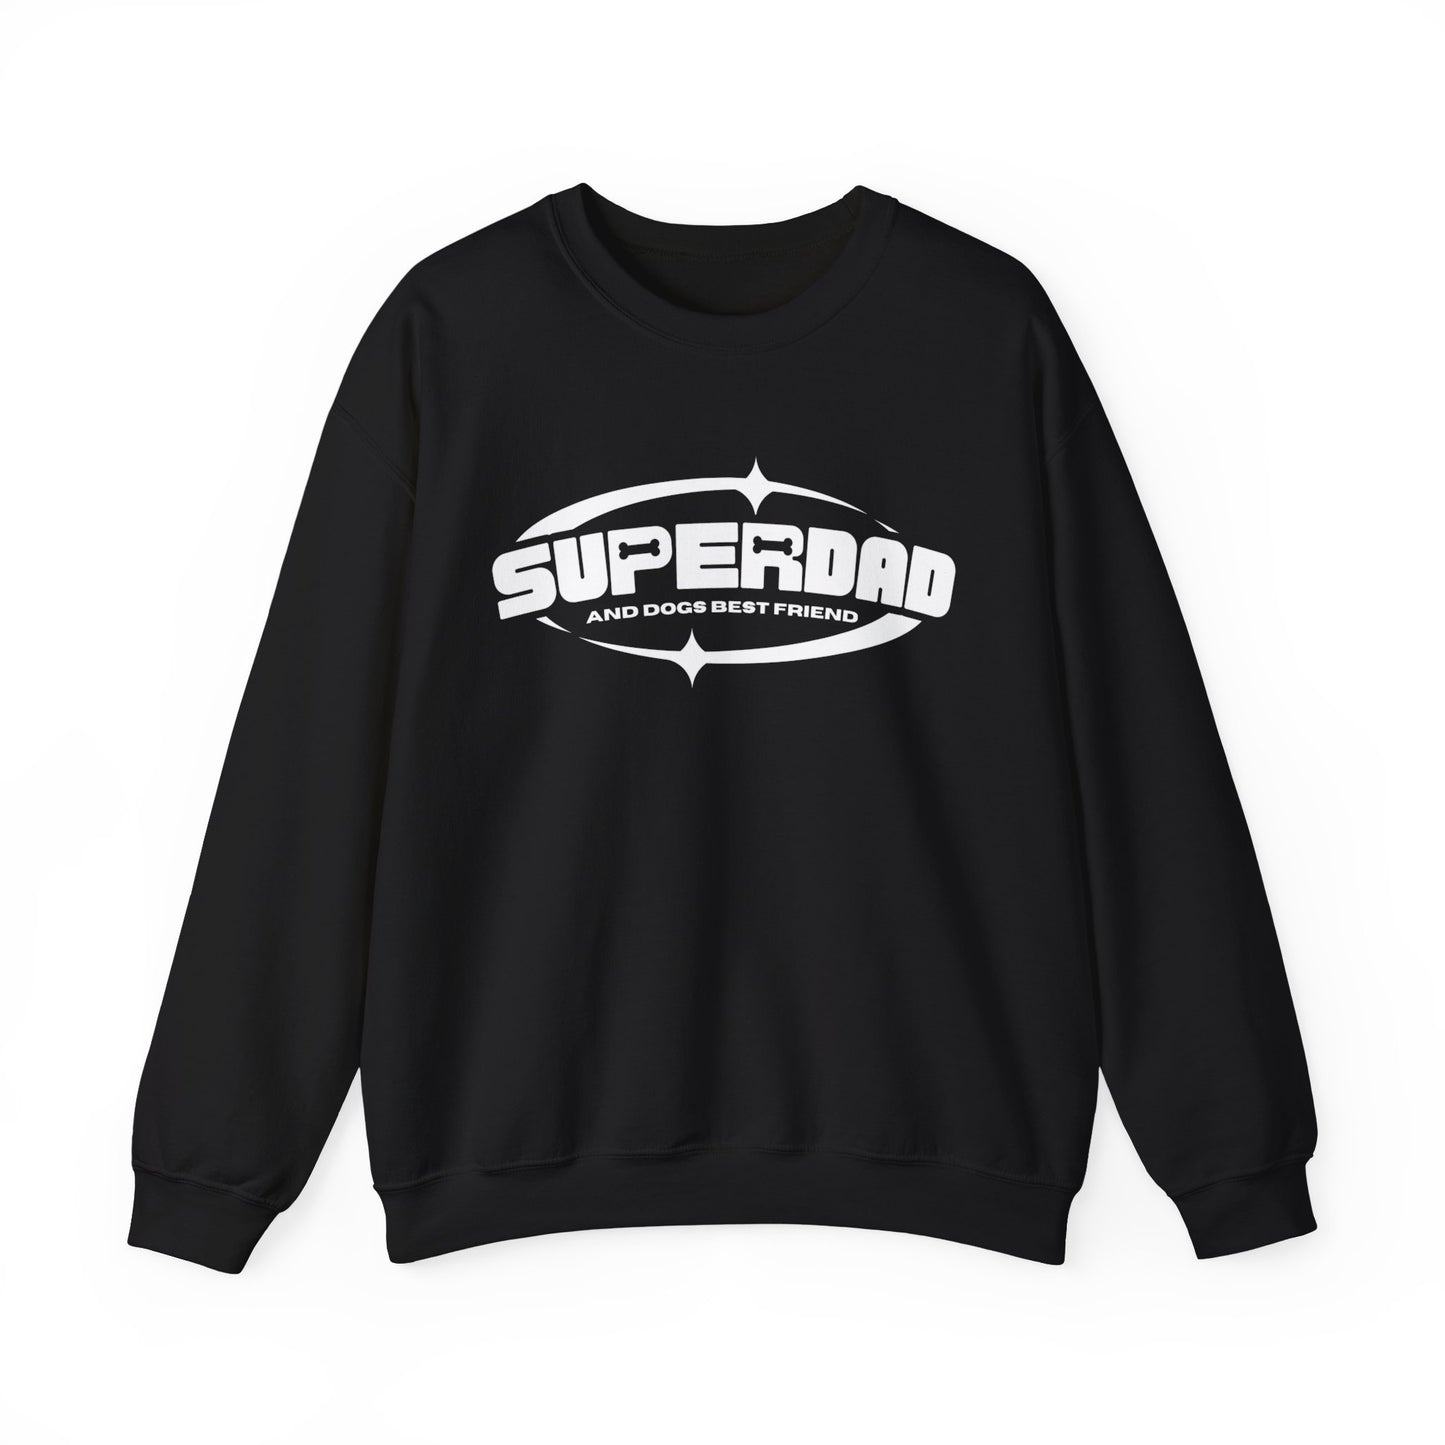  Exhibiting a black unisex sweatshirt from Dogs Pure Love, showcasing the "Superdad" print, against a white backdrop.